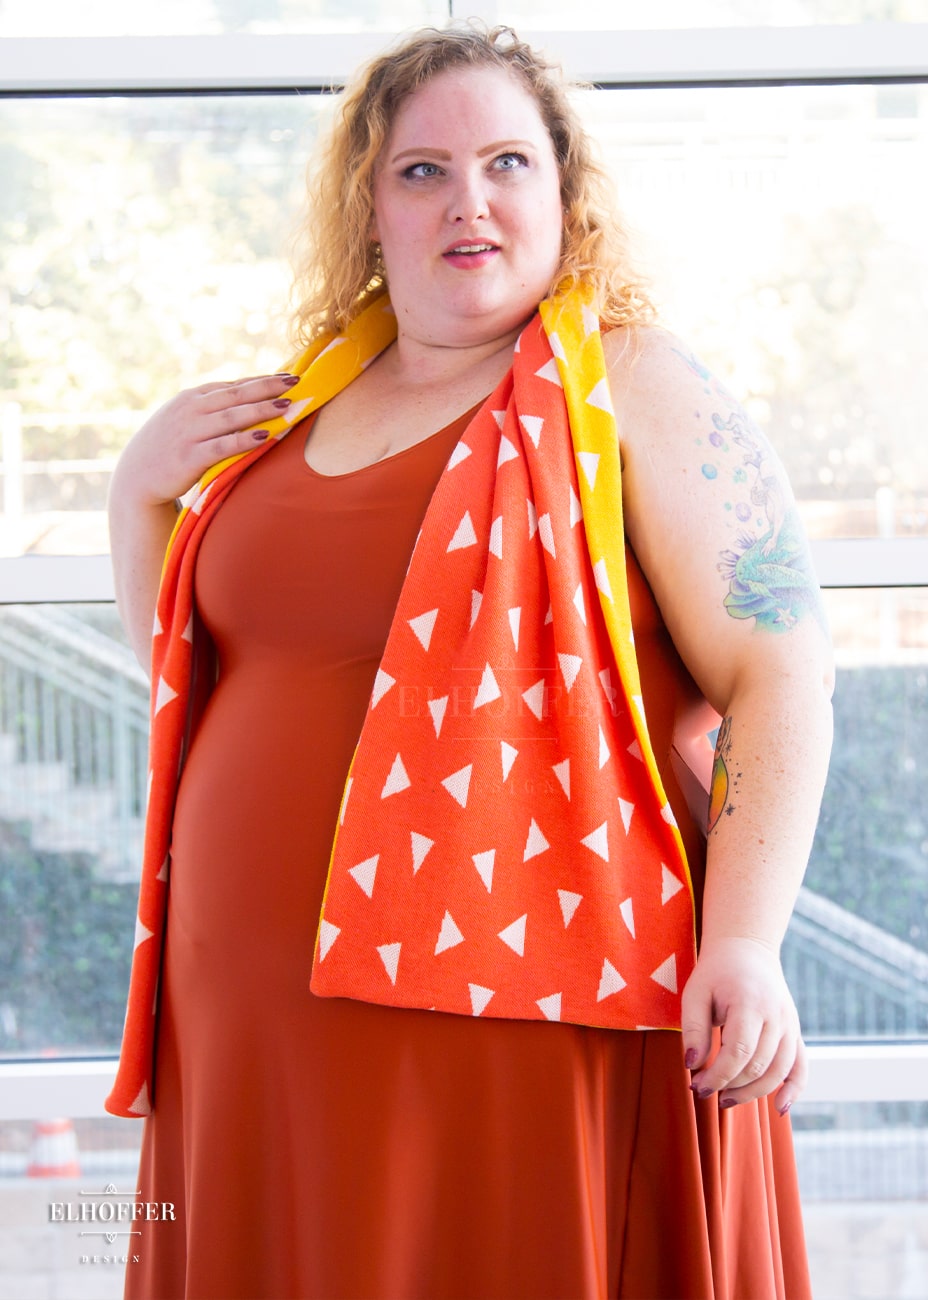 Bee, a fair skinned 3xl model with medium length curly blonde hair, is wearing a reversible knit scarf.  One side of the scarf is orange with white triangles and the other side is yellow with white triangles.